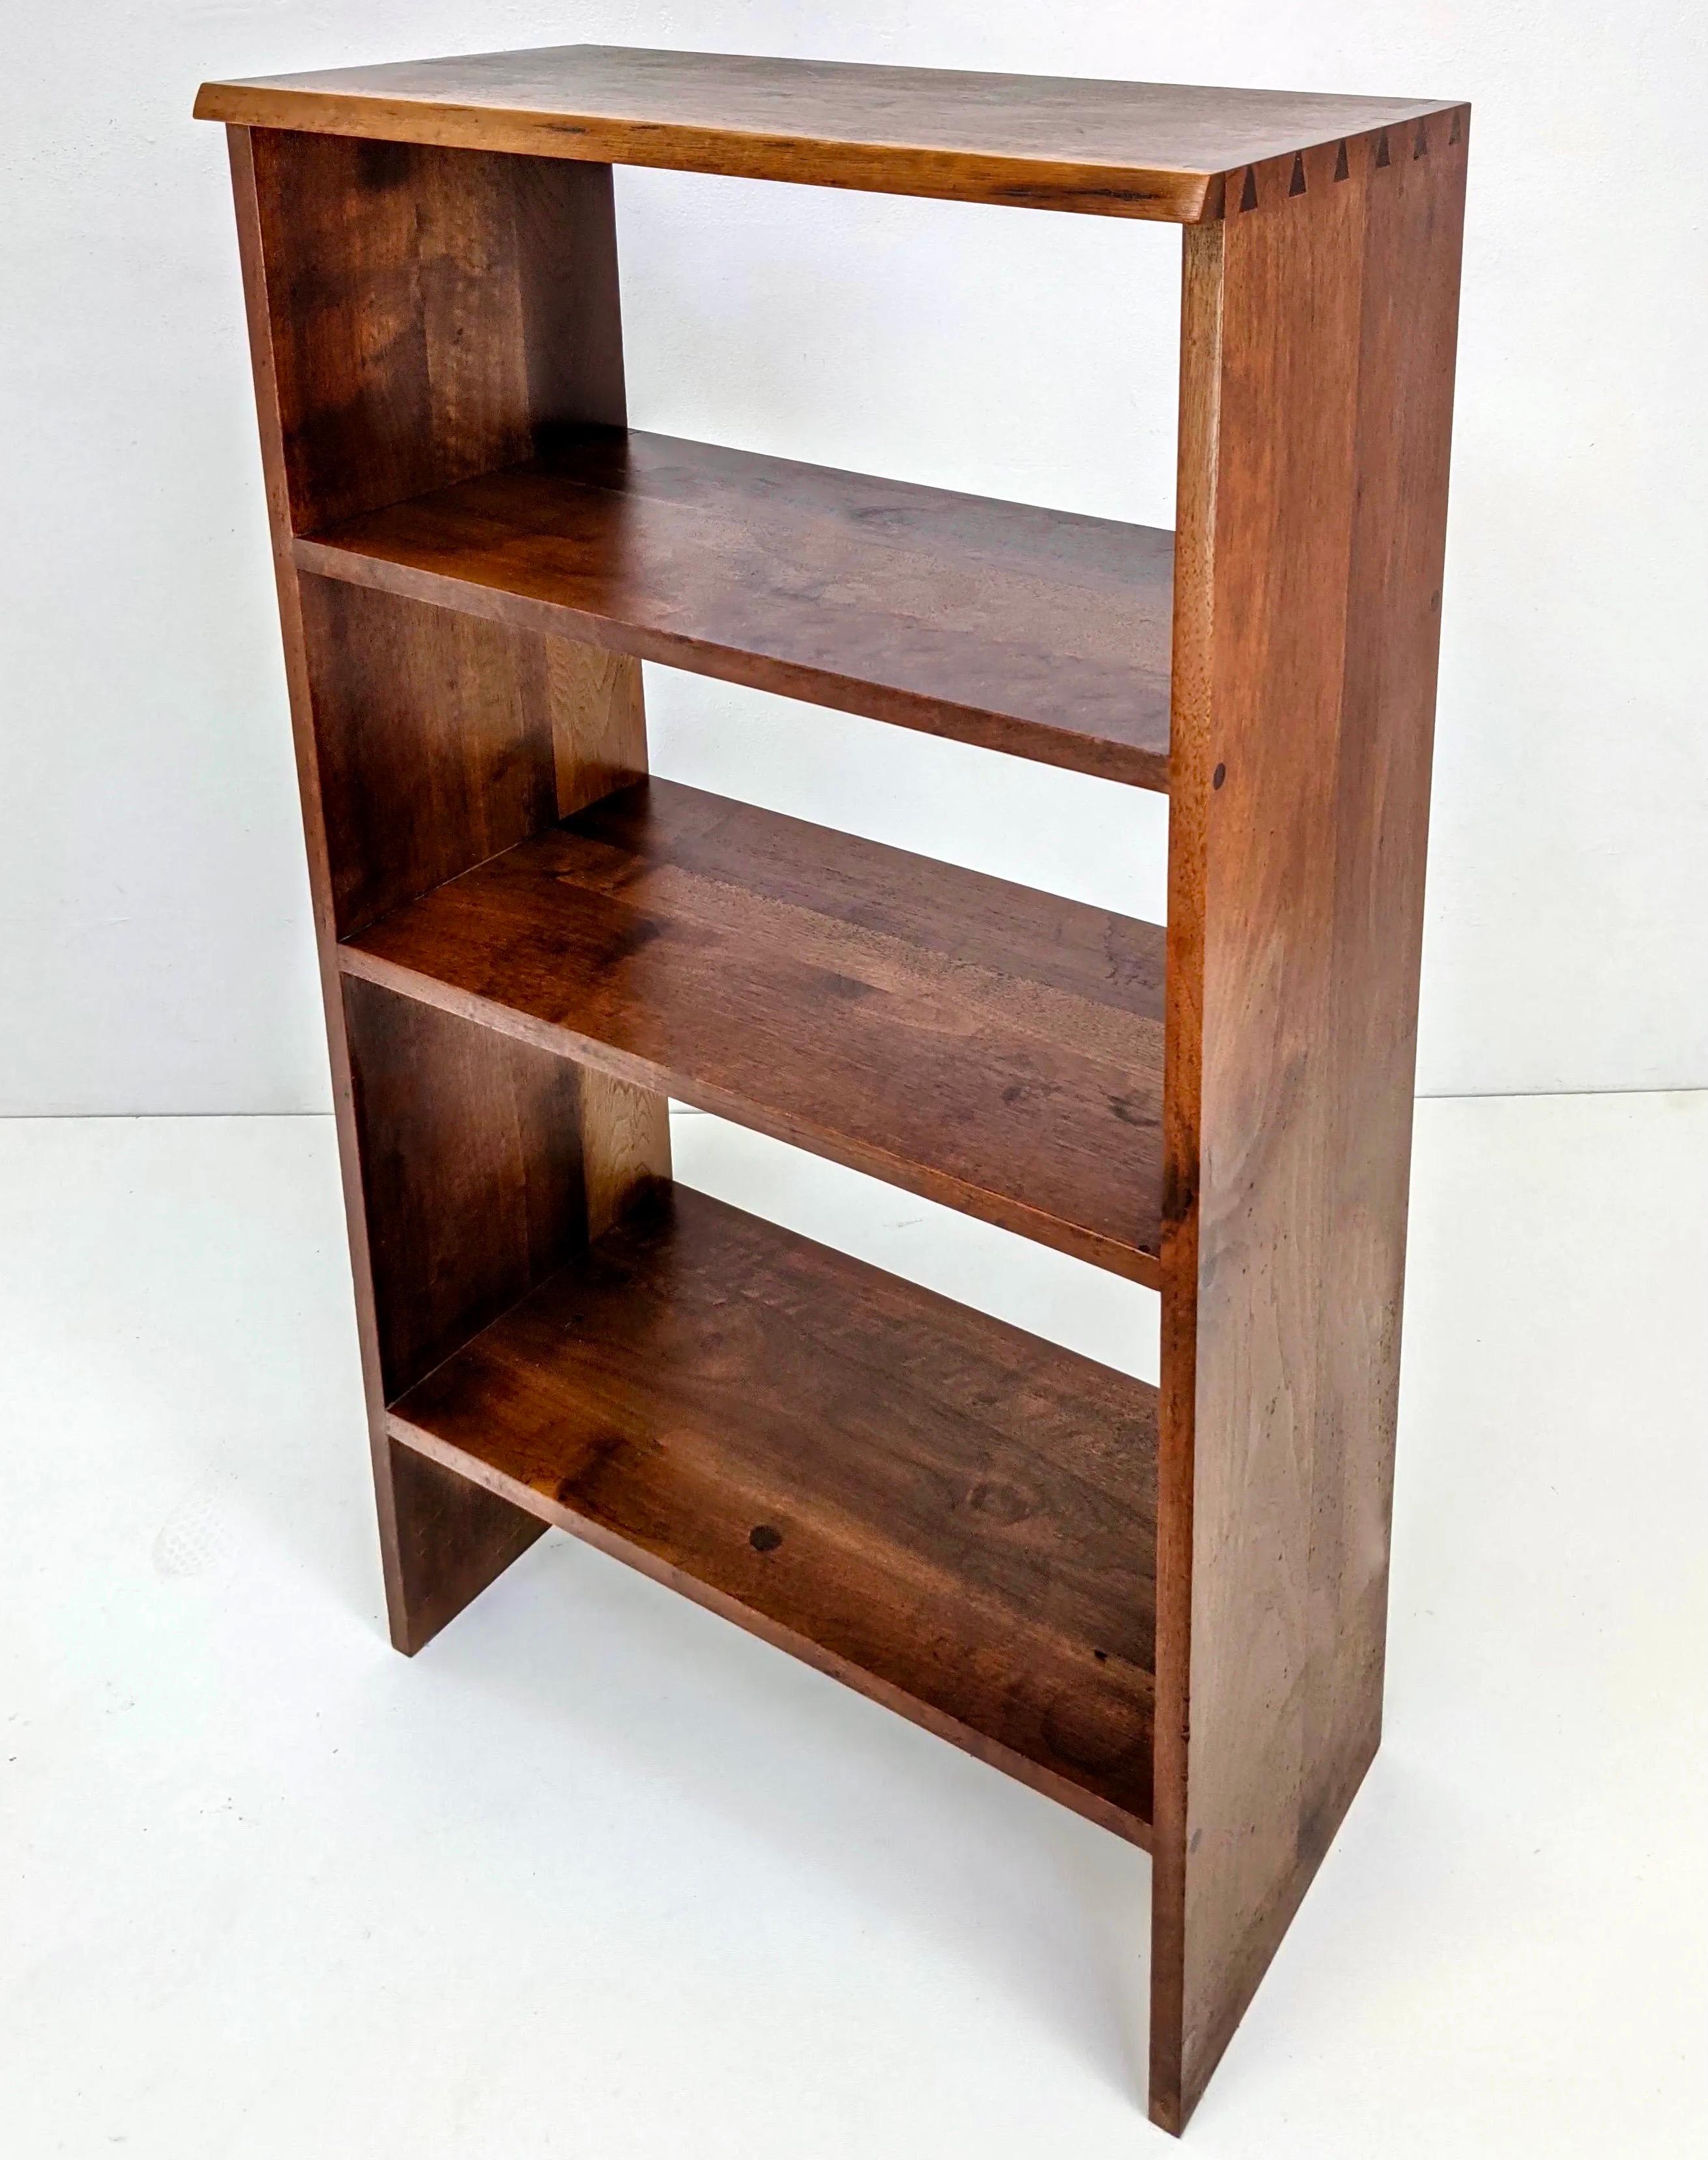 George Nakashima walnut bookcase shelving, free edge, 1960s. American walnut bookcase, free edge walnut top and corner dovetail details.  Nakashima’s belief was that when you made furniture, you created a new life for a tree. His work showcases the